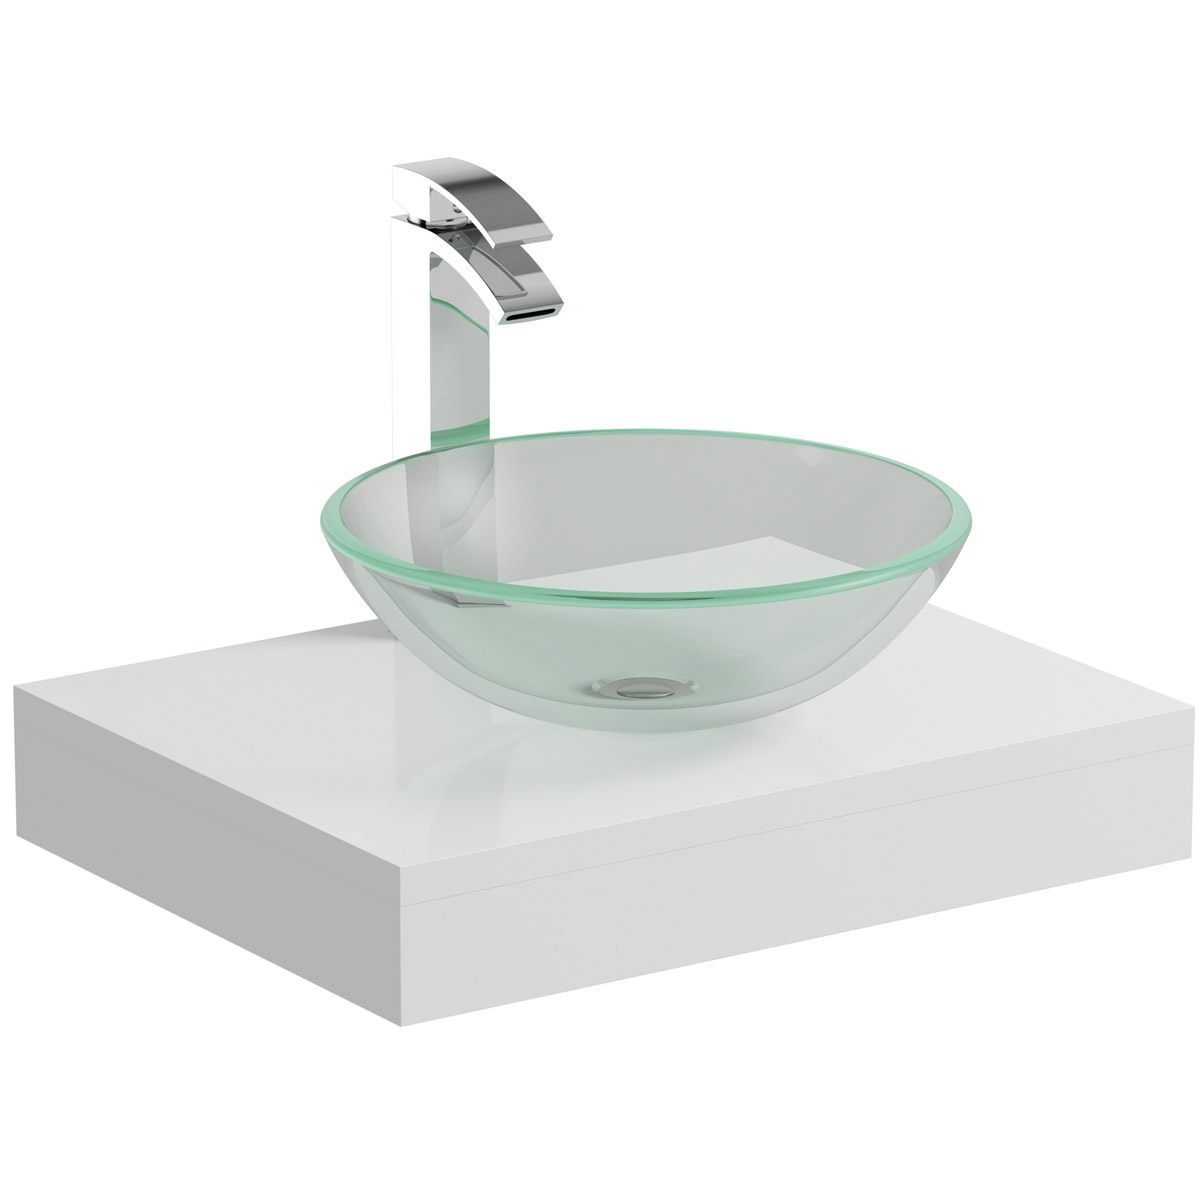 Mode Orion white countertop shelf 600mm with Mackintosh glass countertop basin, tap and waste